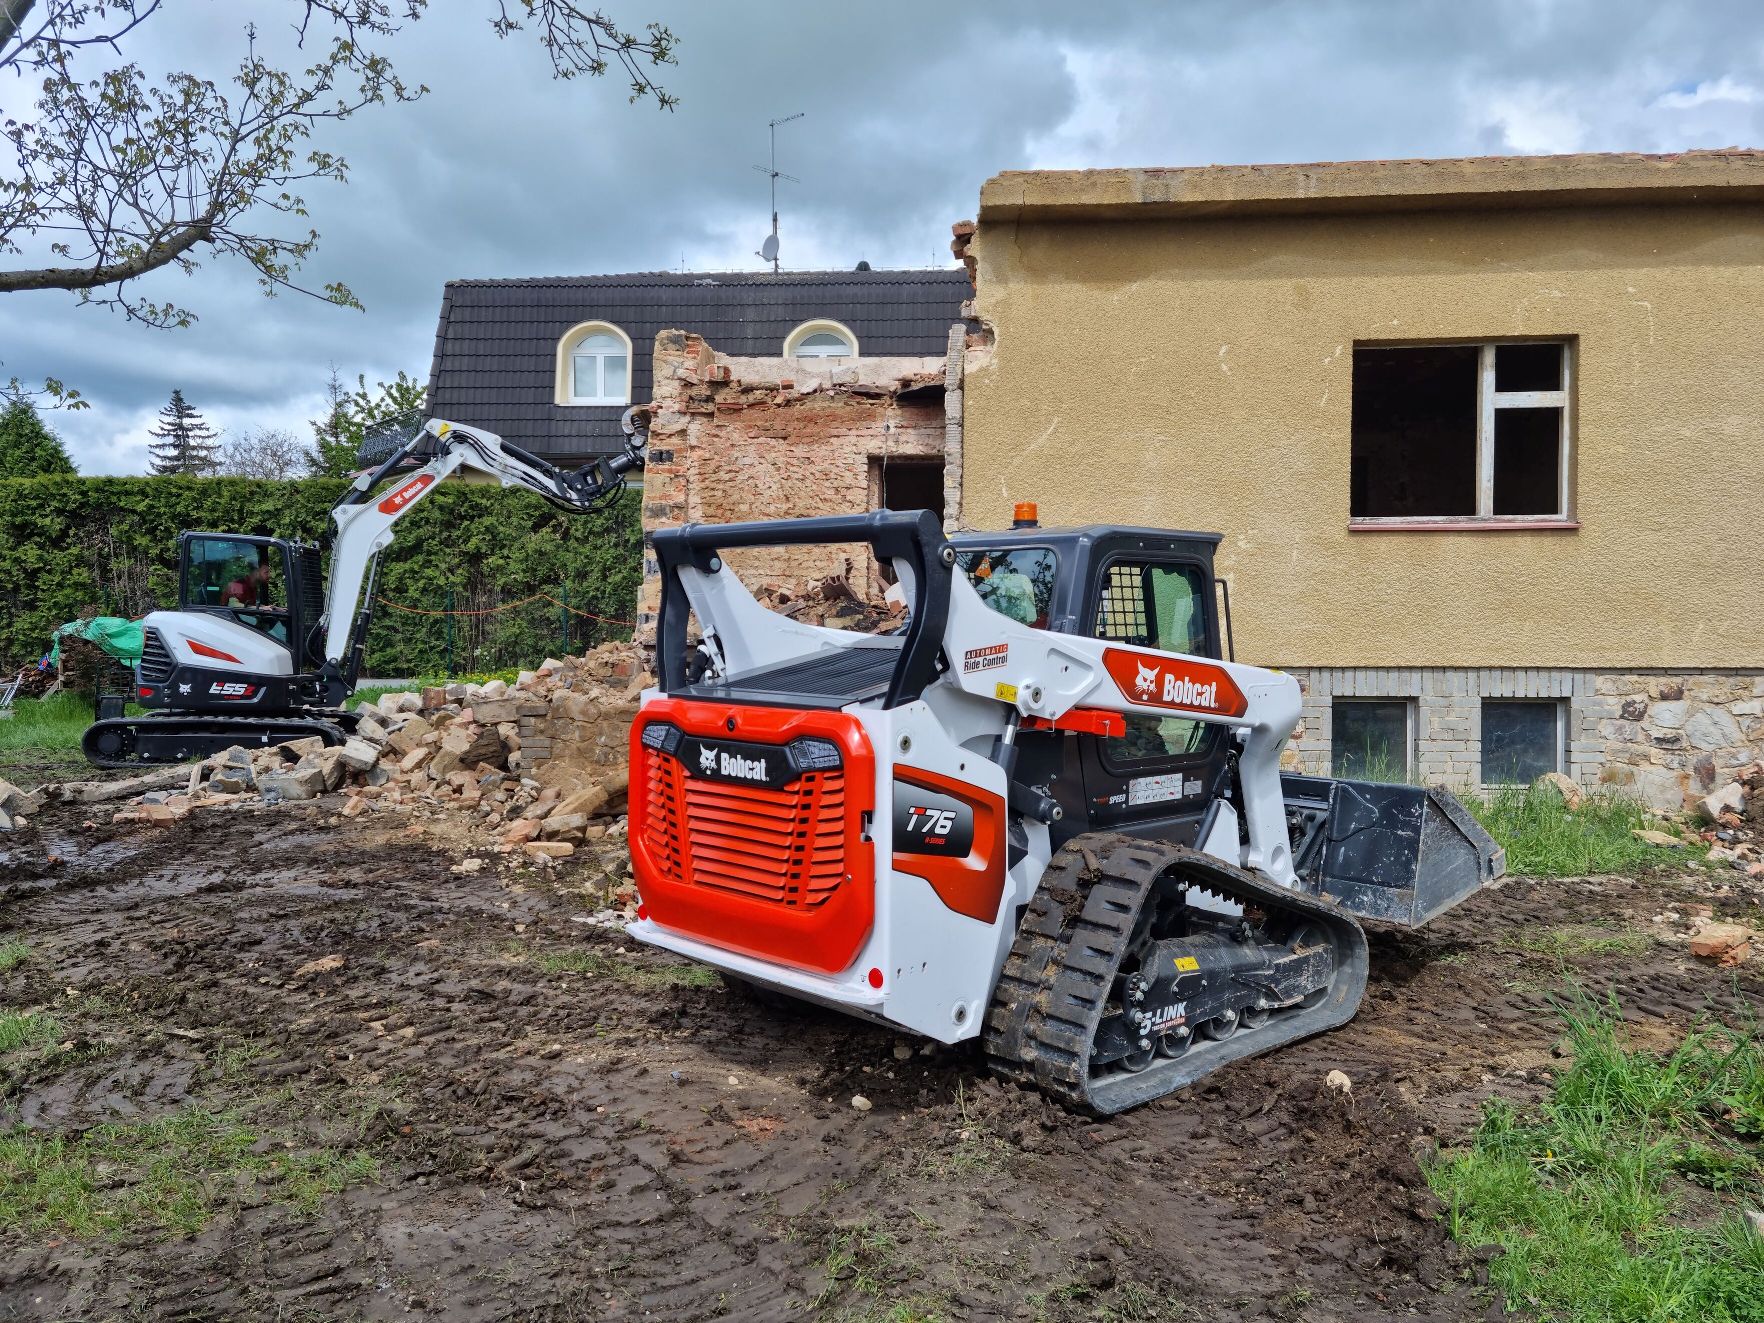 New Bobcat excavator and loader demolish house in just two days